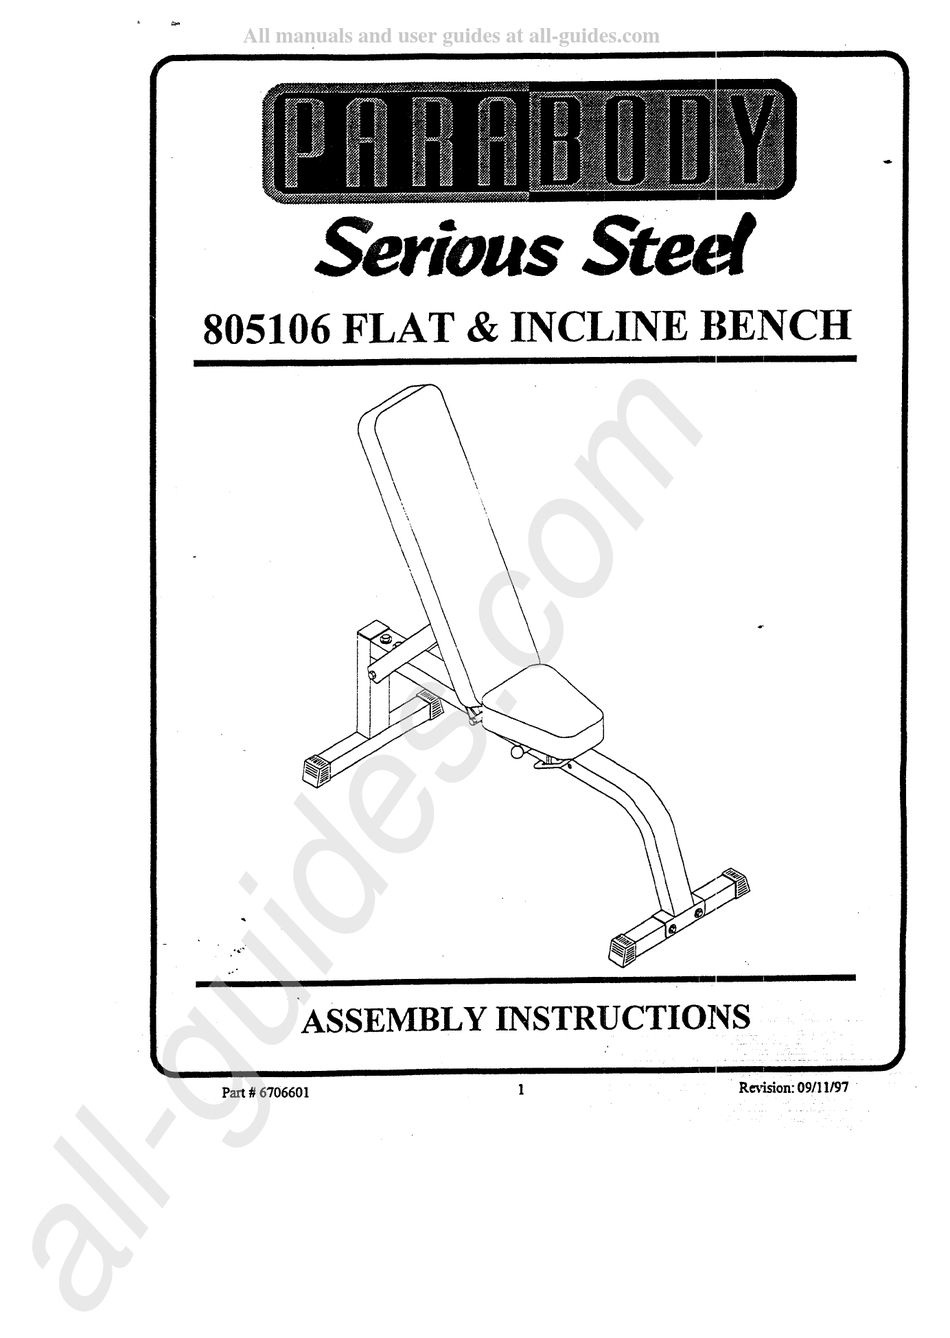 PARABODY SERIOUS STEEL 805106 ASSEMBLY INSTRUCTIONS MANUAL Pdf Download ...